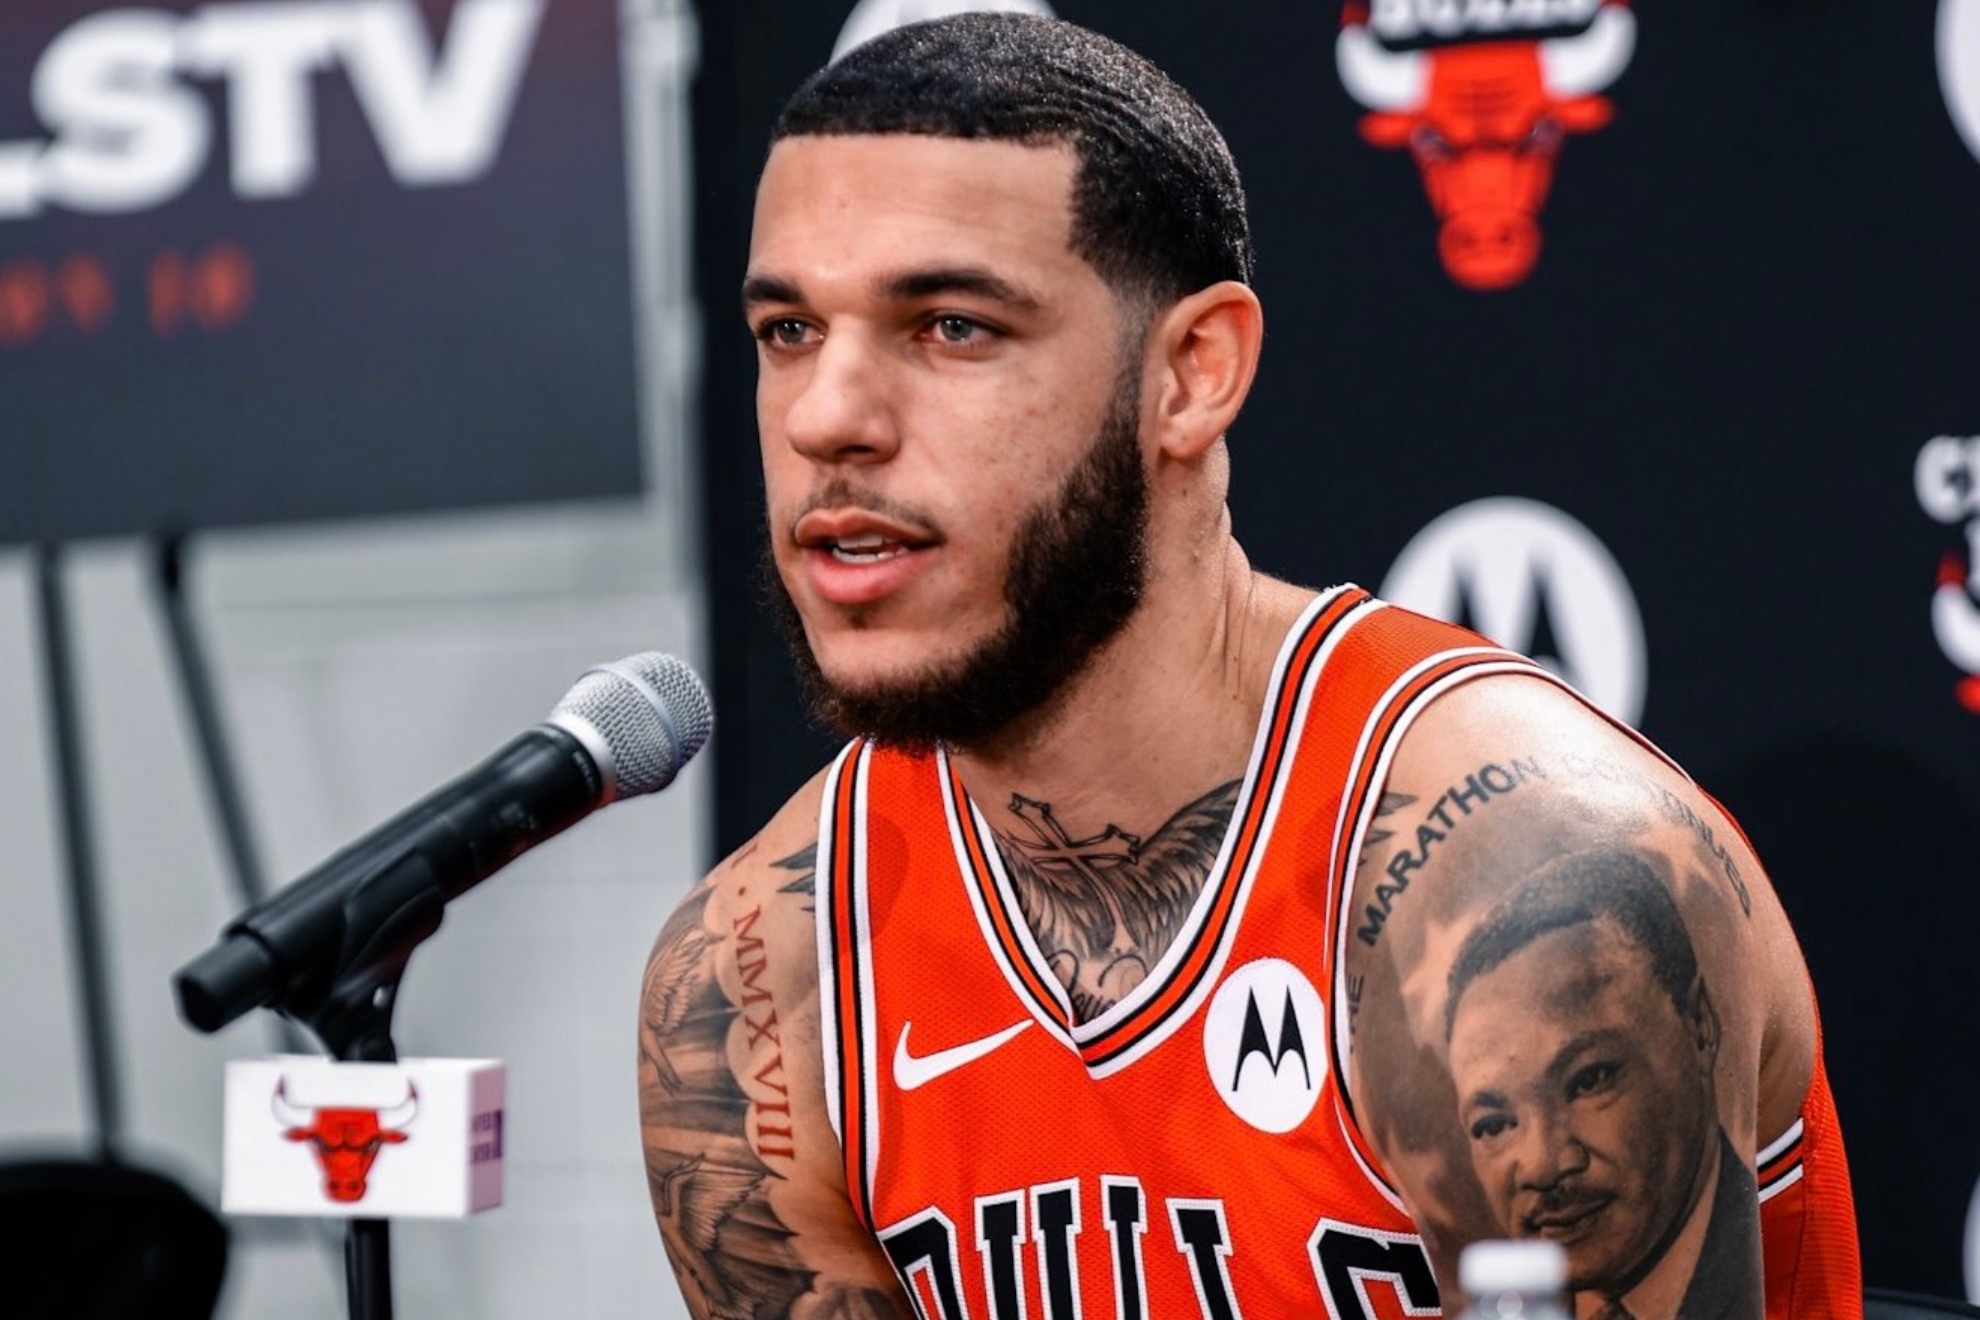 Lonzo Ball was present at the Bulls media day